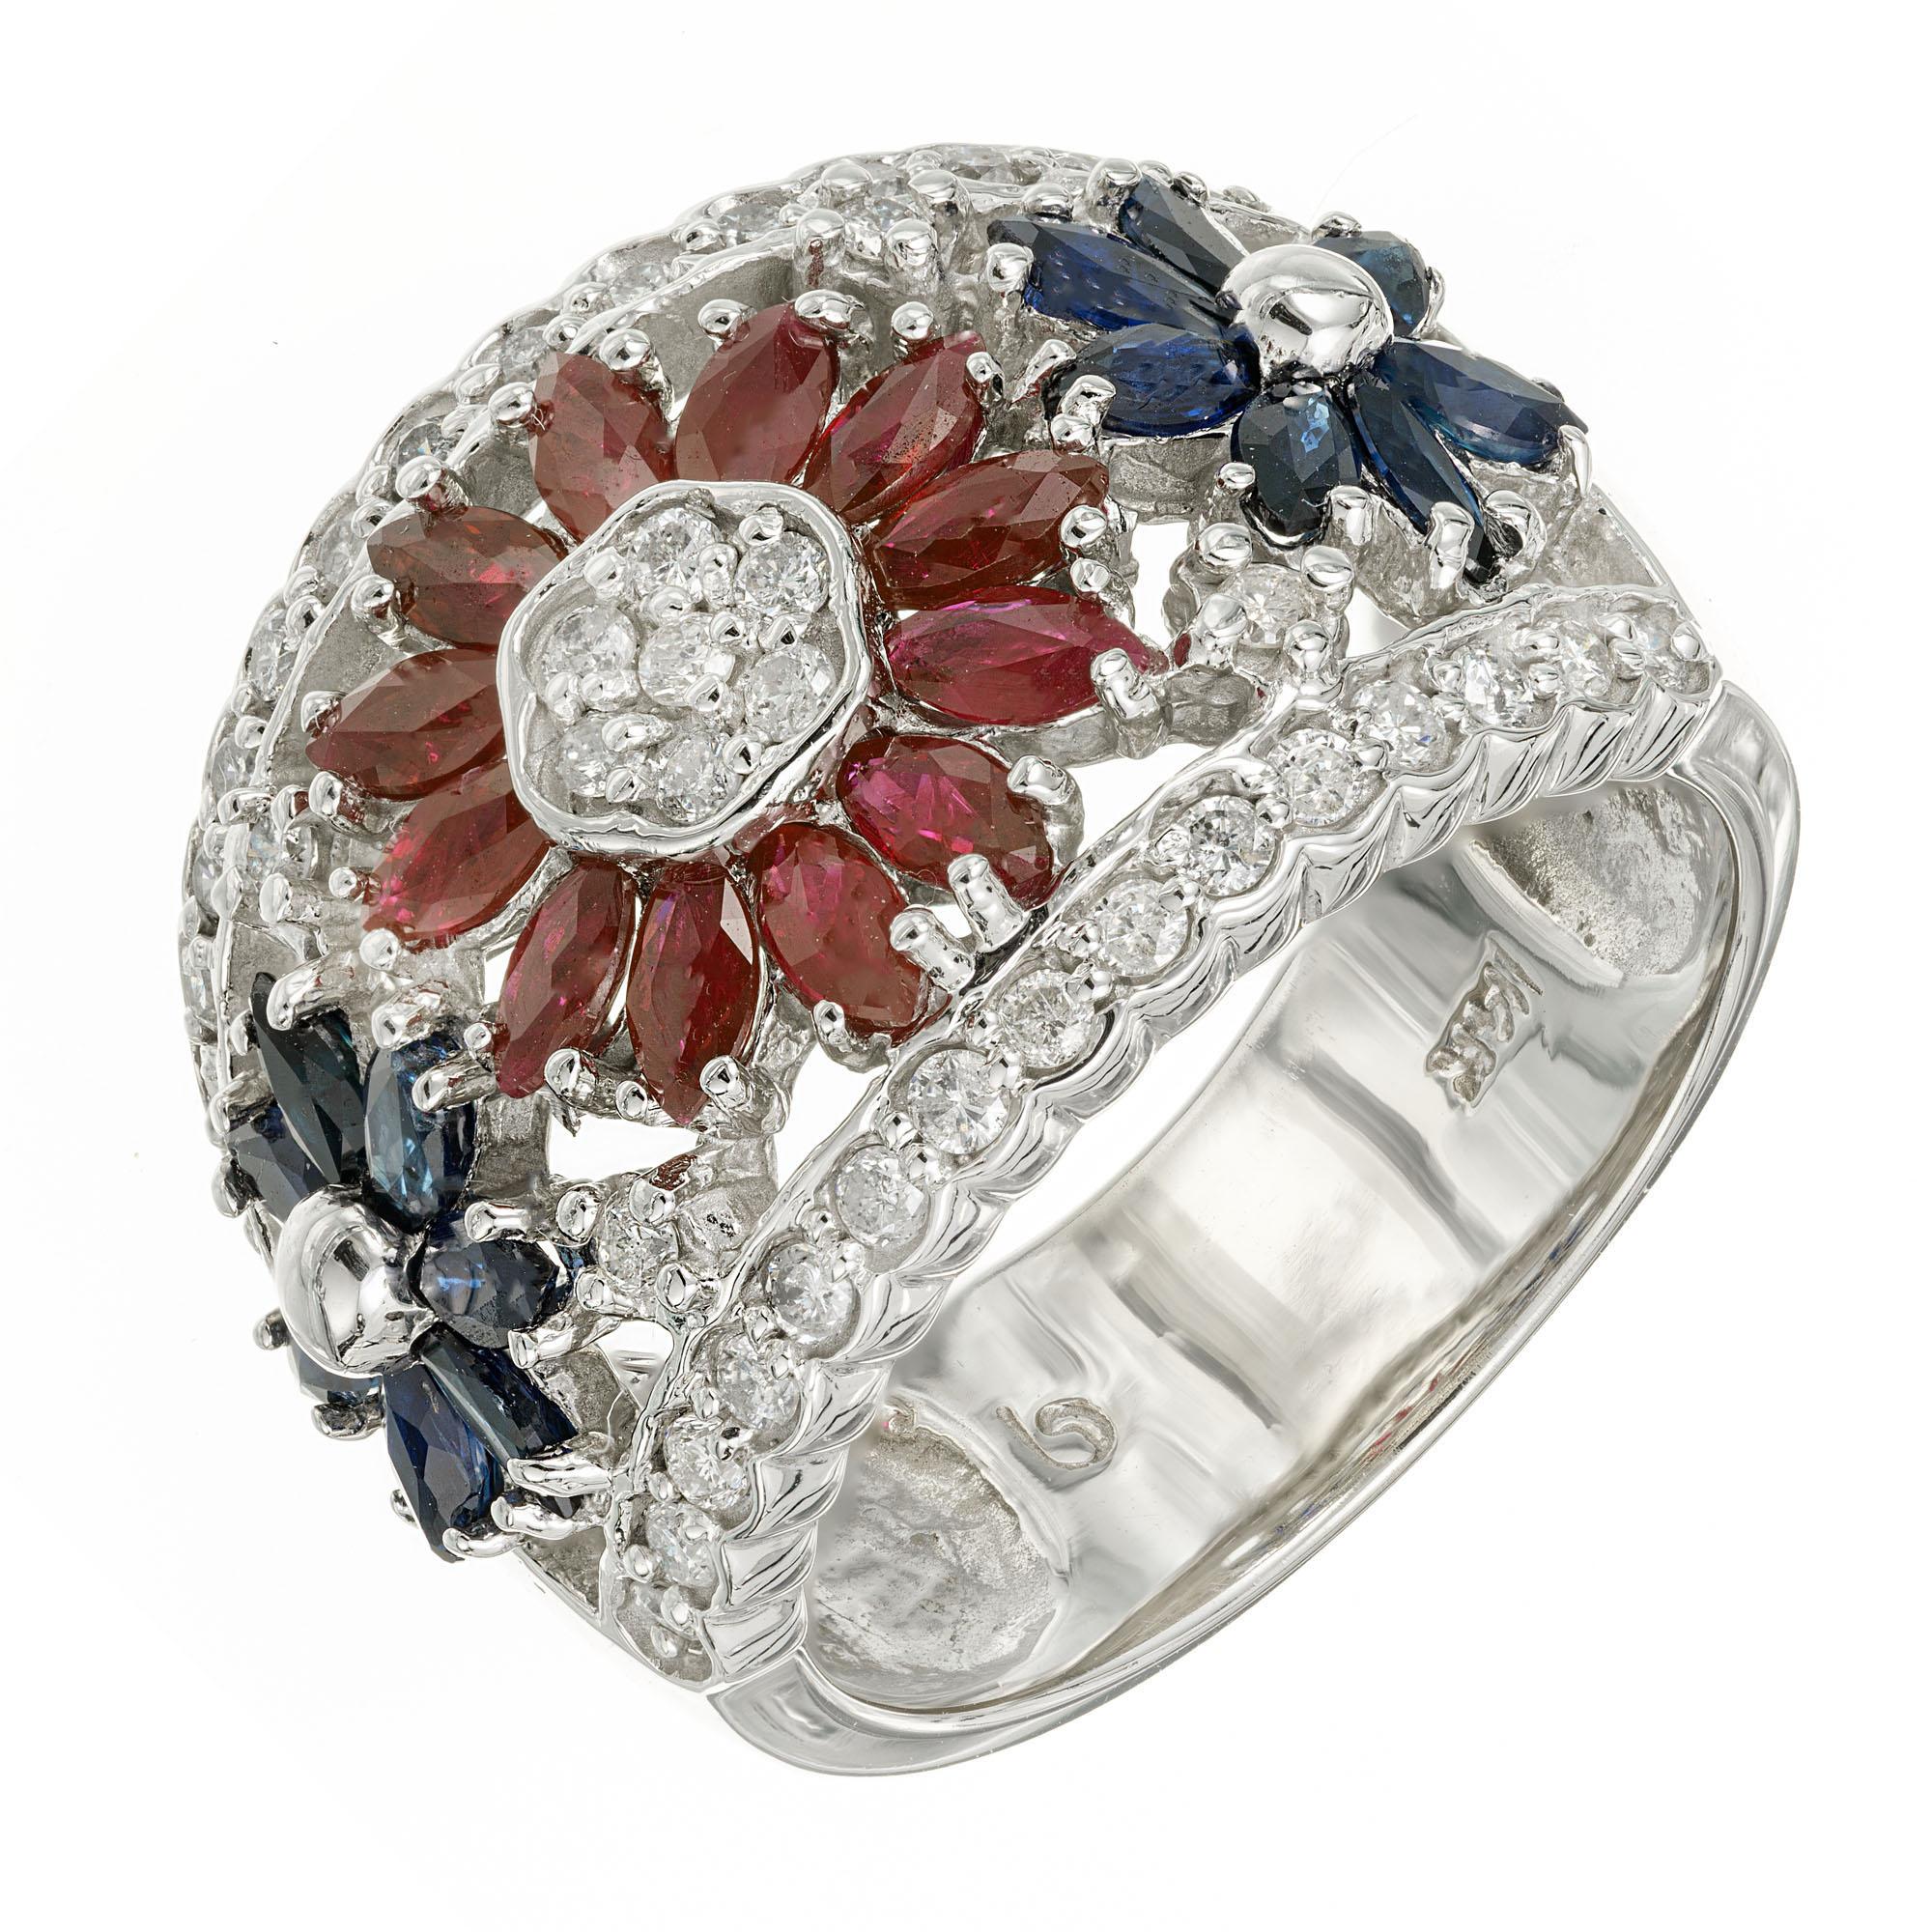 Wide tapered open work flower ring, set with 14 marquise sapphires and 12 marguise rubies with 41 round accent diamonds, set in 14k white gold wide band setting. 

14 marquise blue sapphires, approx. .84cts
12 marquise red rubies, approx. .72cts
41